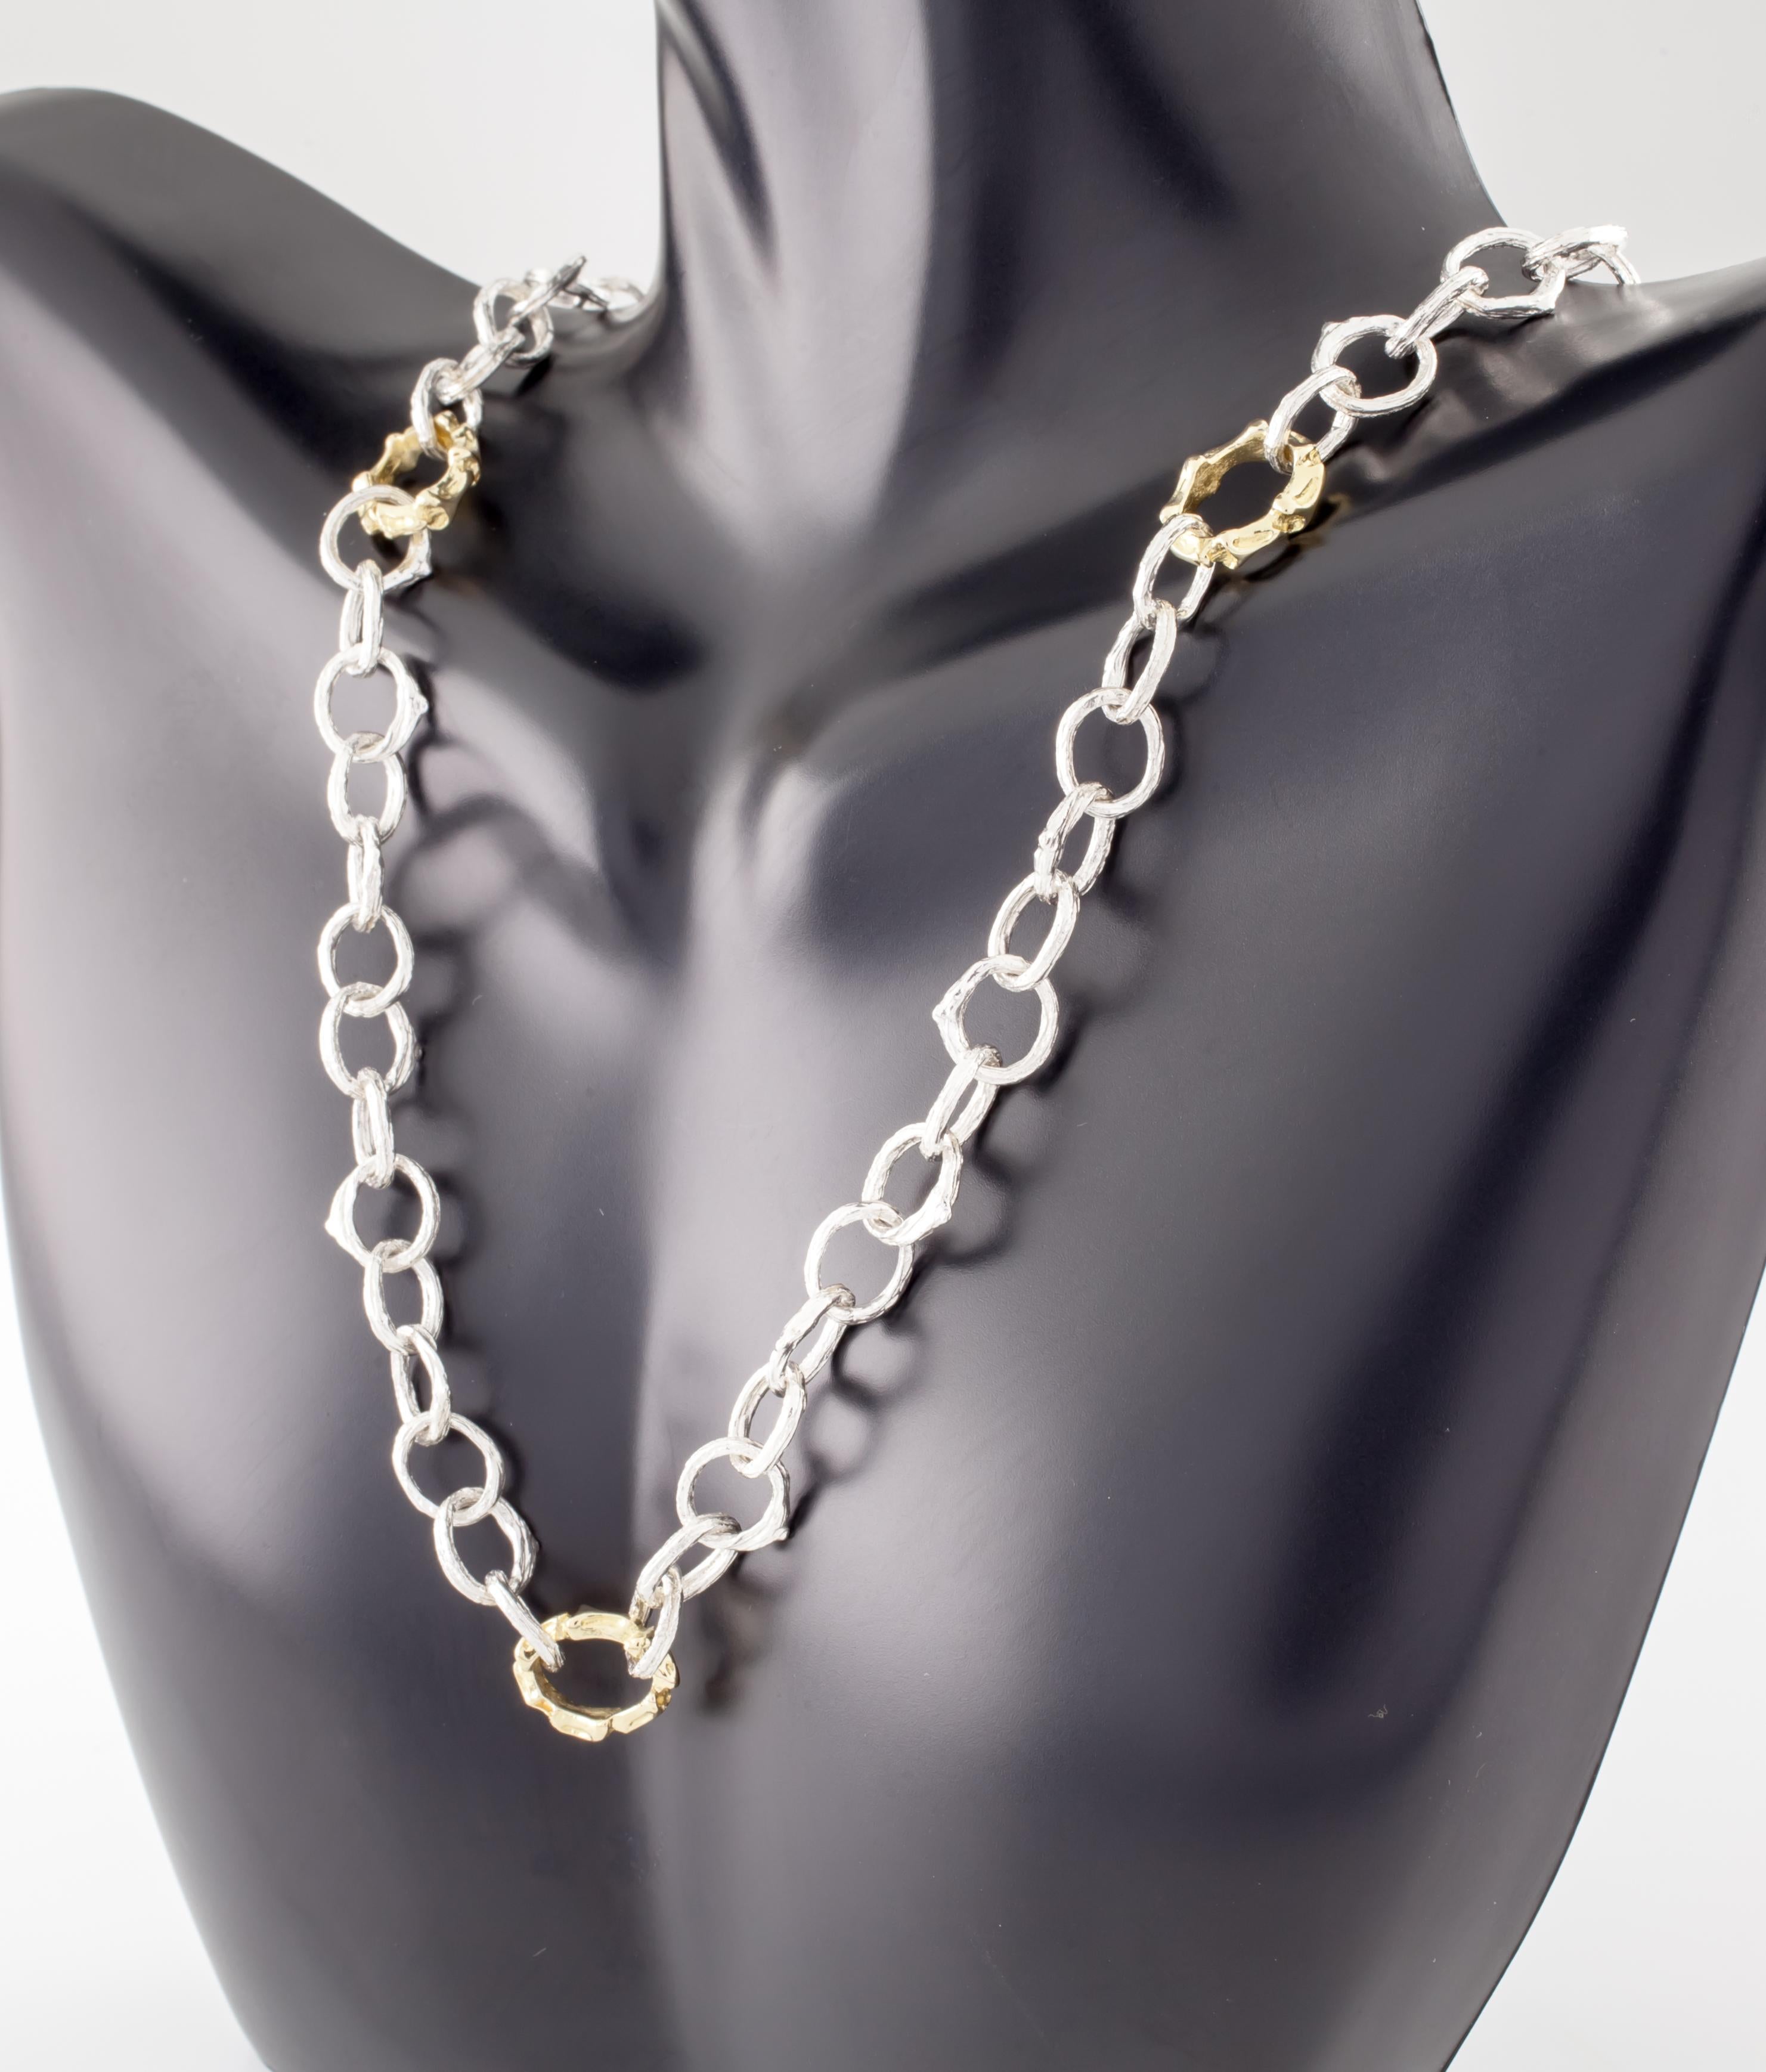 Gorgeous Sterling Silver and 18k Yellow Gold Necklace by Renowned Jeweler Katey Brunini
Feature Twig Designs in Interlinked Sterling Silver and 18k Gold Loops
Silver Loops Appx 9 mm in Diameter
Gold Loops Appx 12 mm in Diameter
Necklace = Appx 23